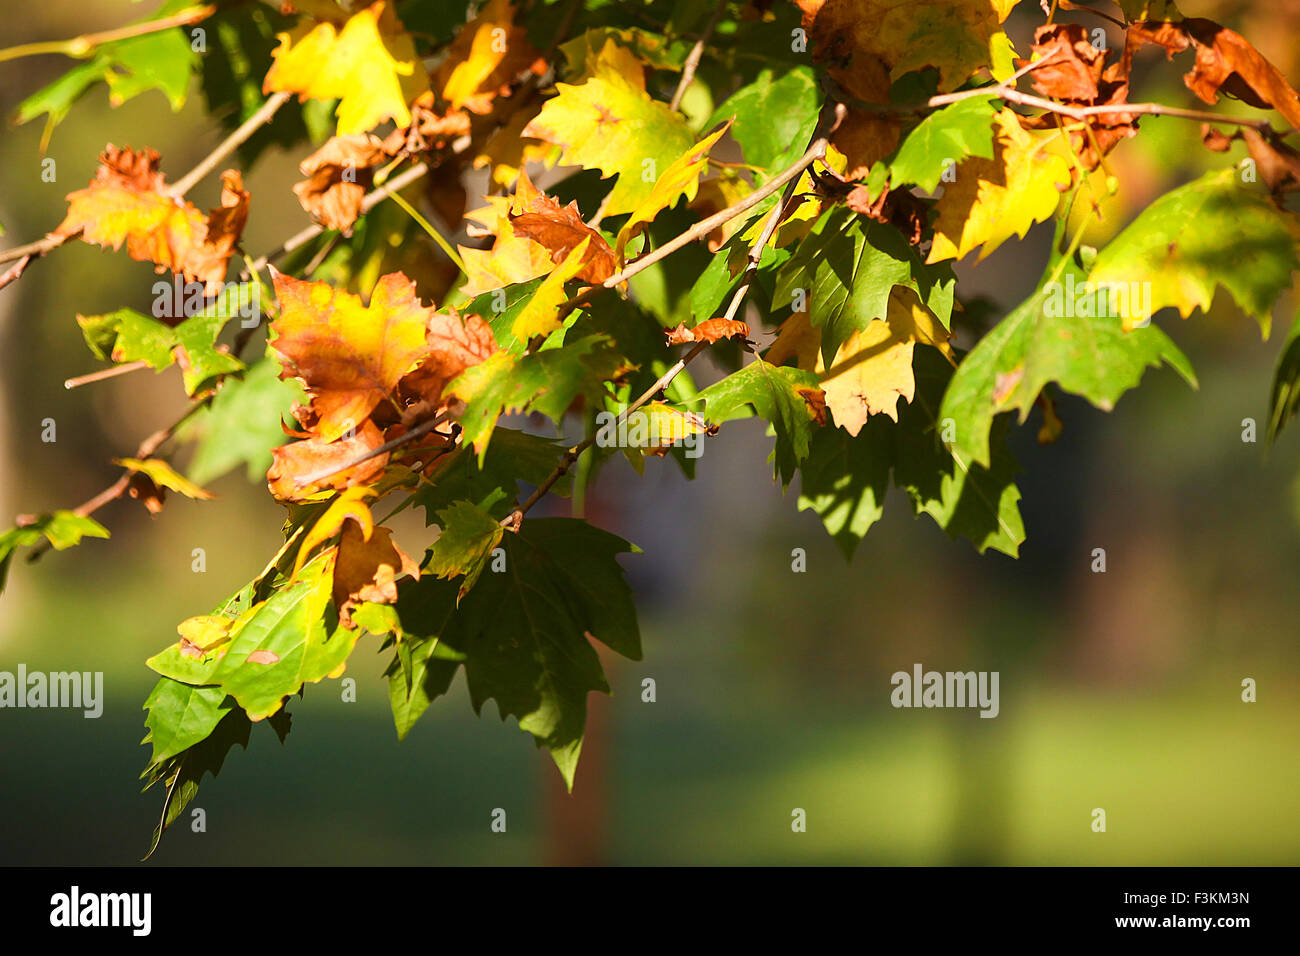 Colorful Foliage in Autumn Time. Full Frame Stock Photo